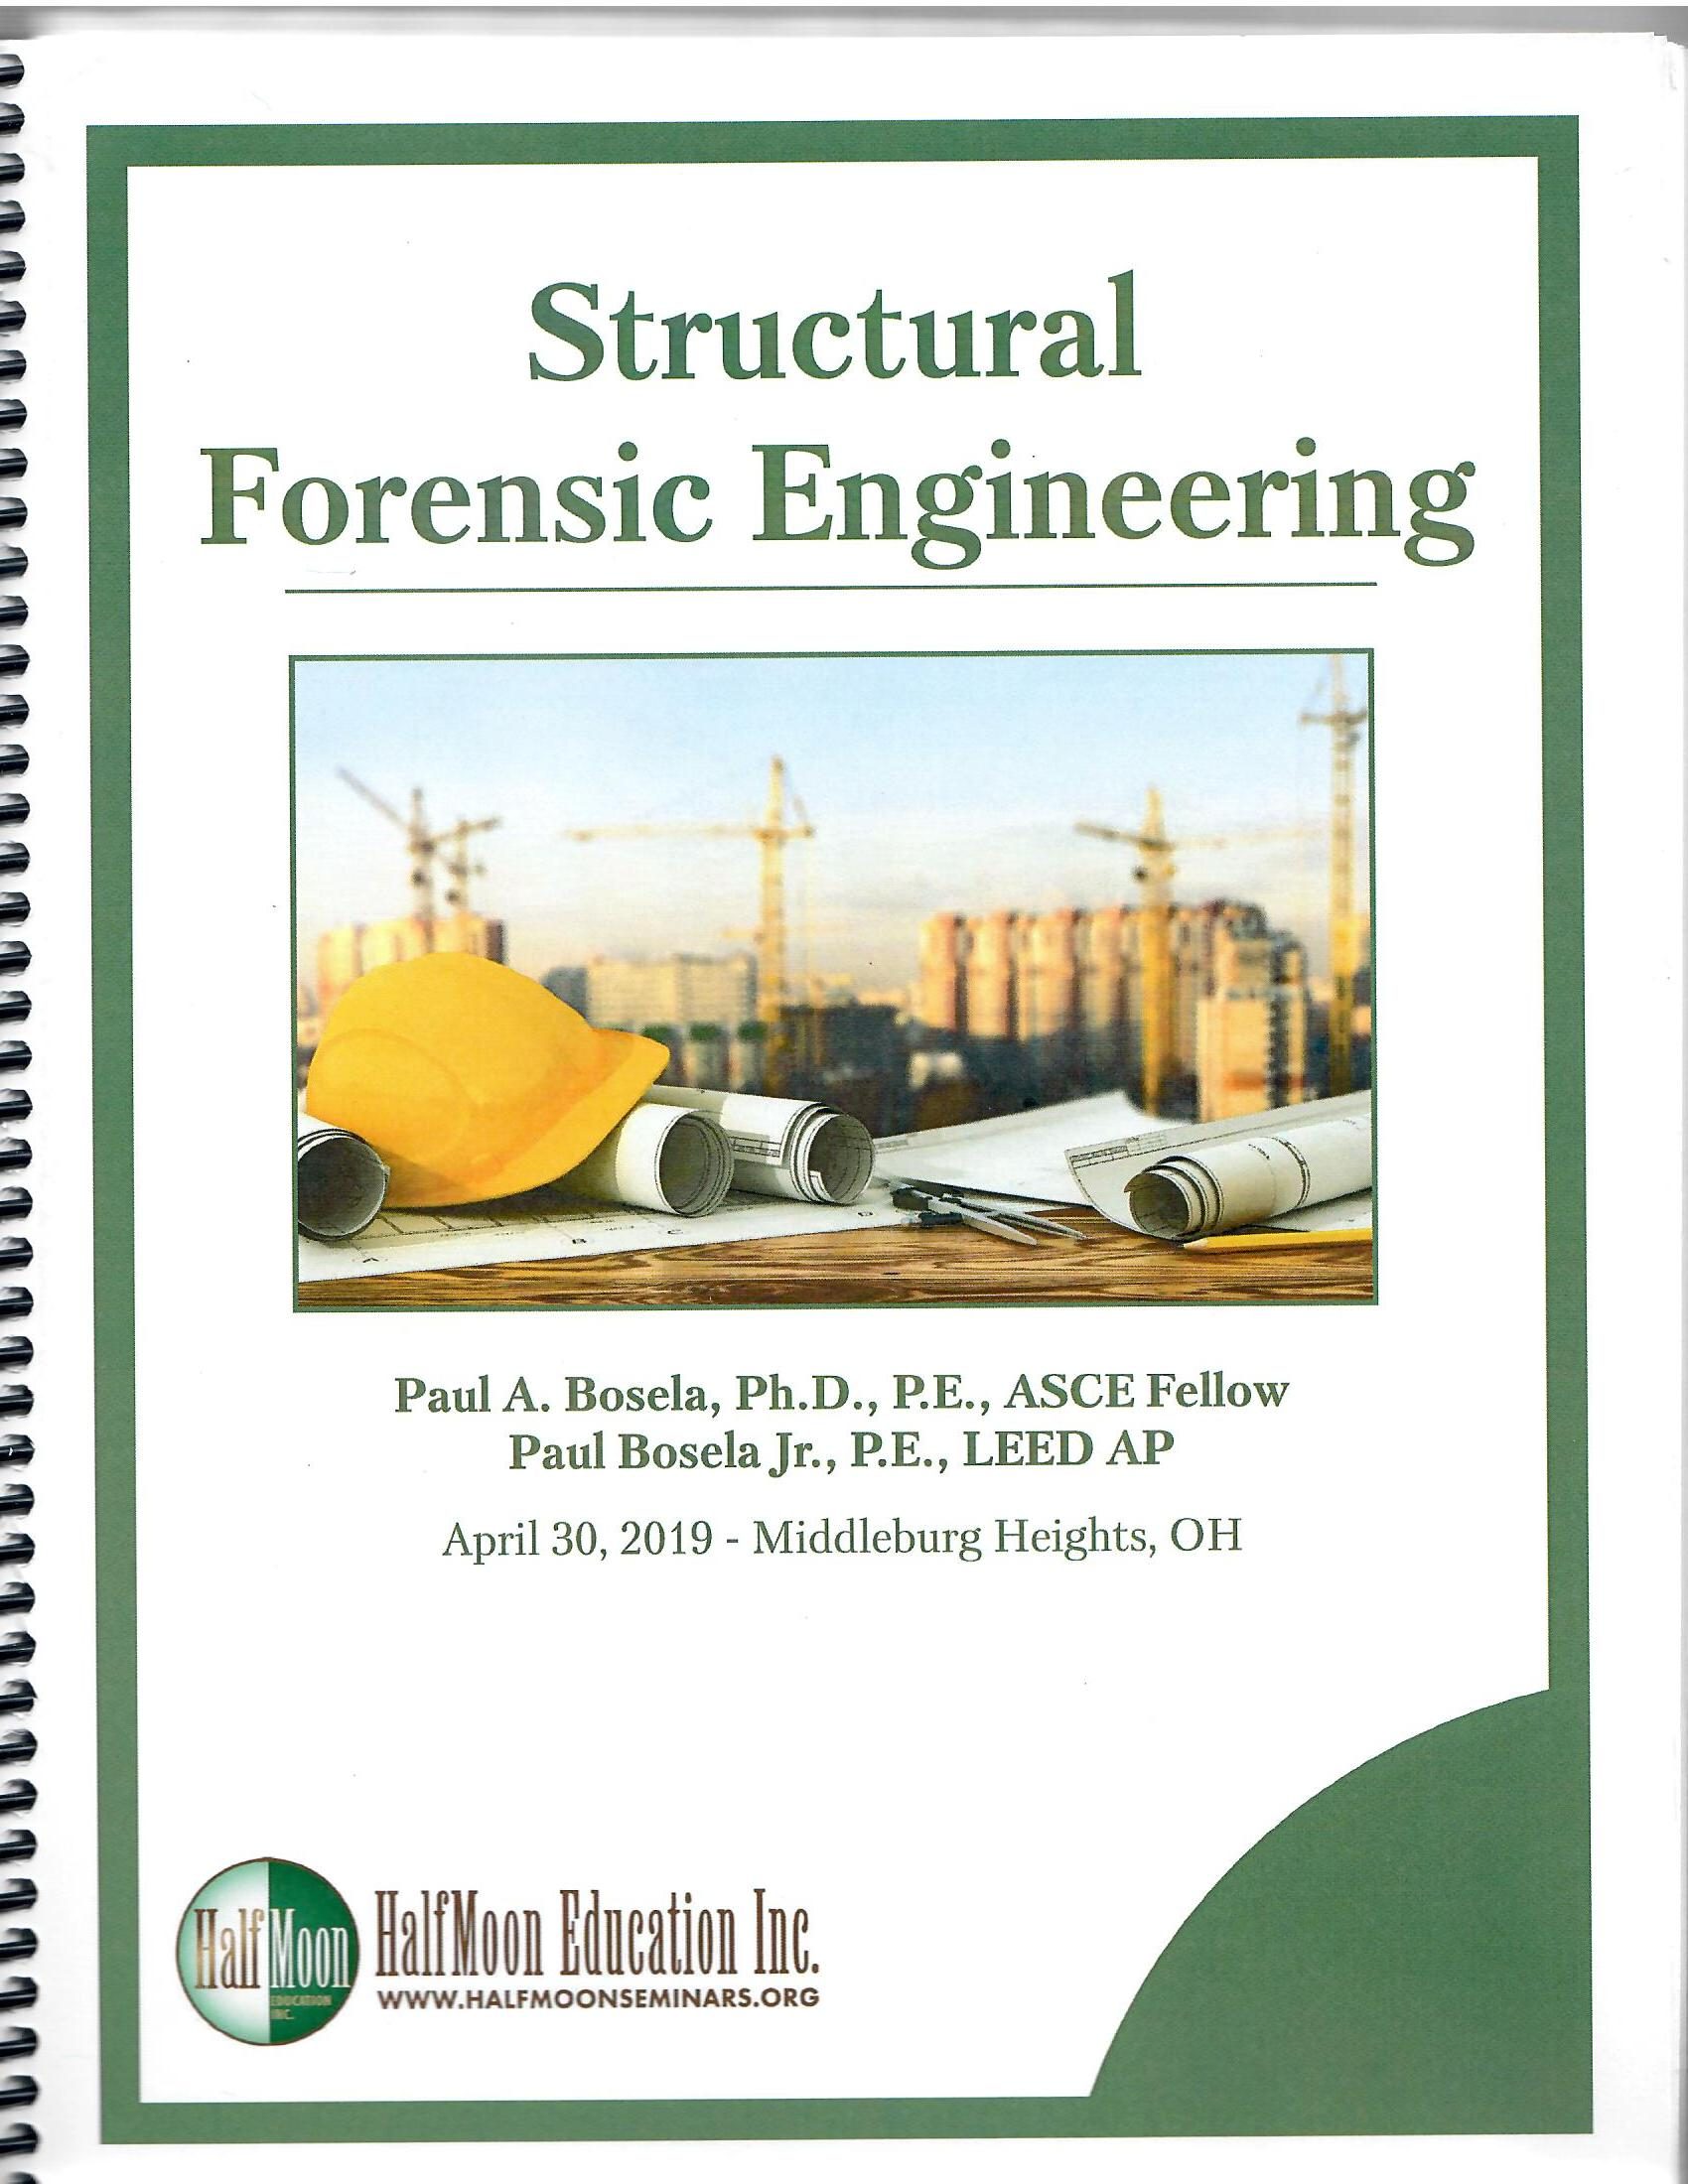 Structural Forensic Engineering Seminar